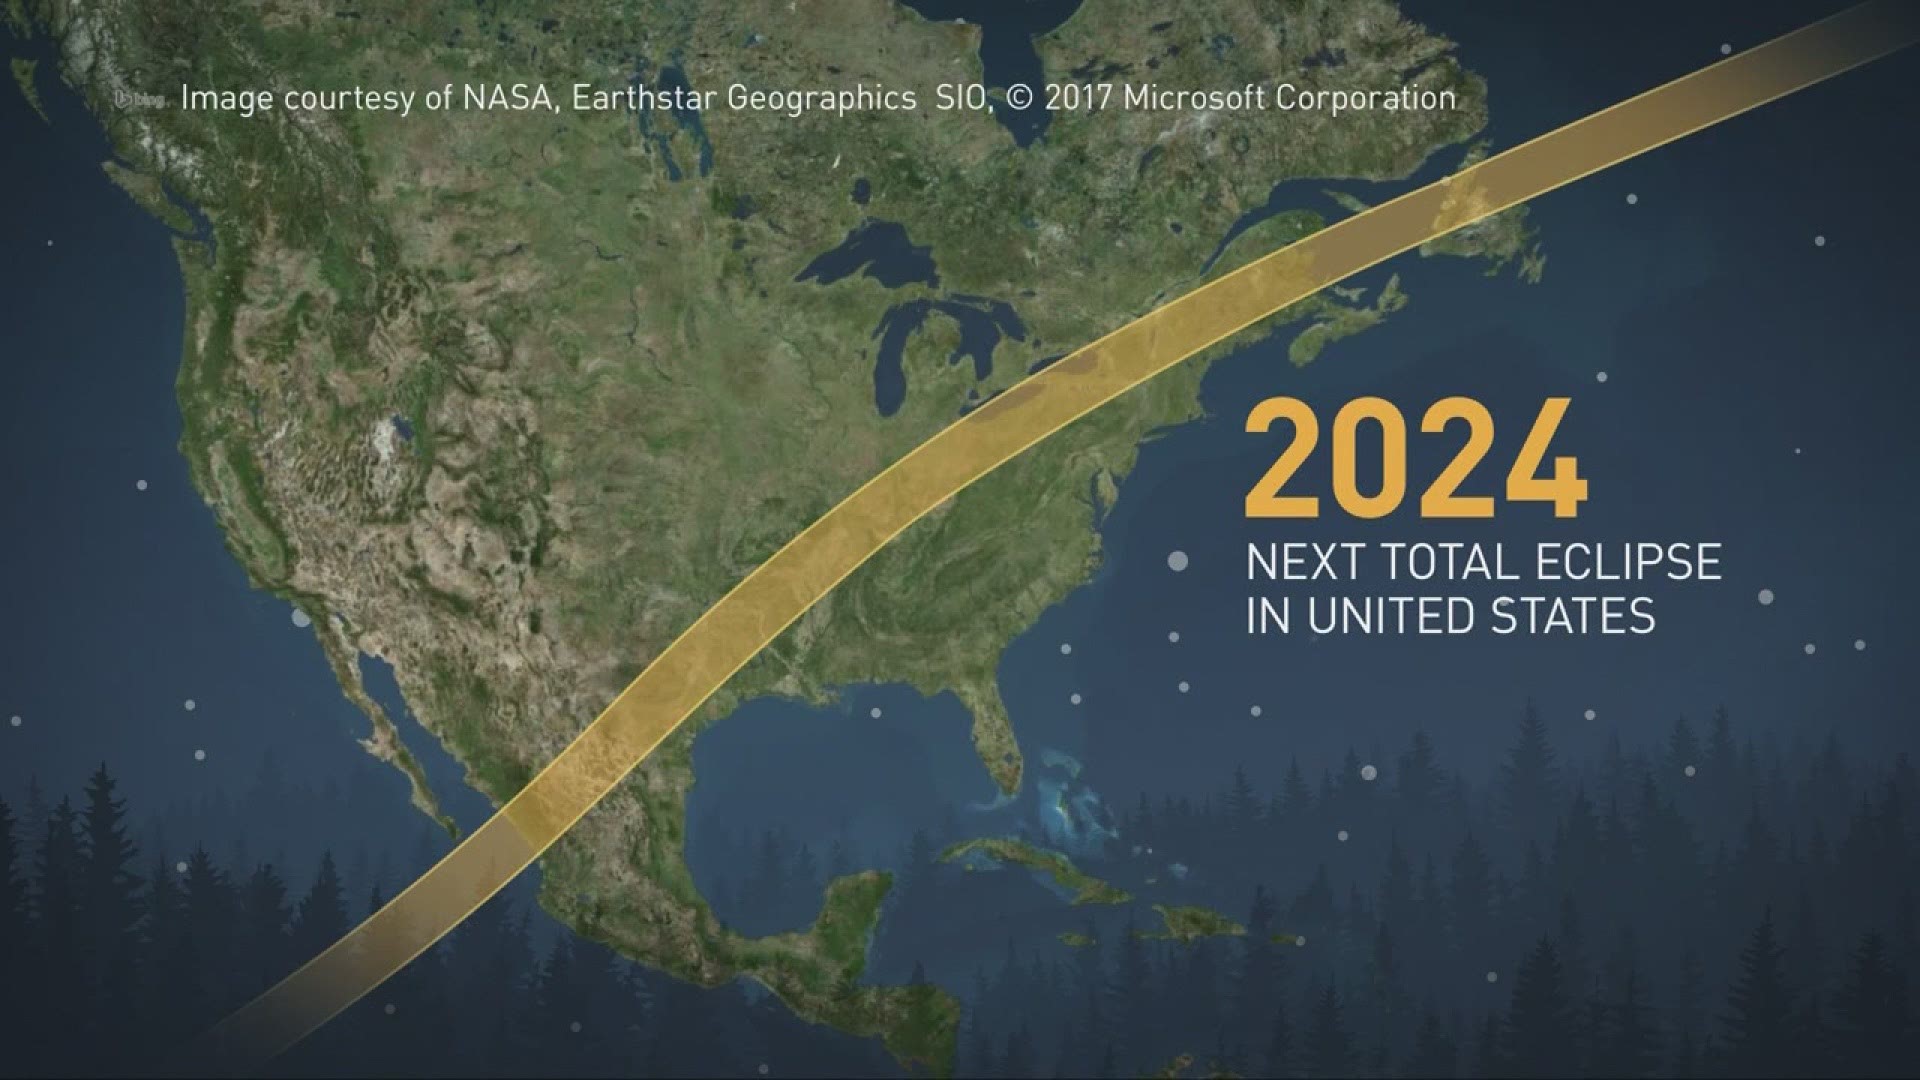 Path of the 2024 solar eclipse